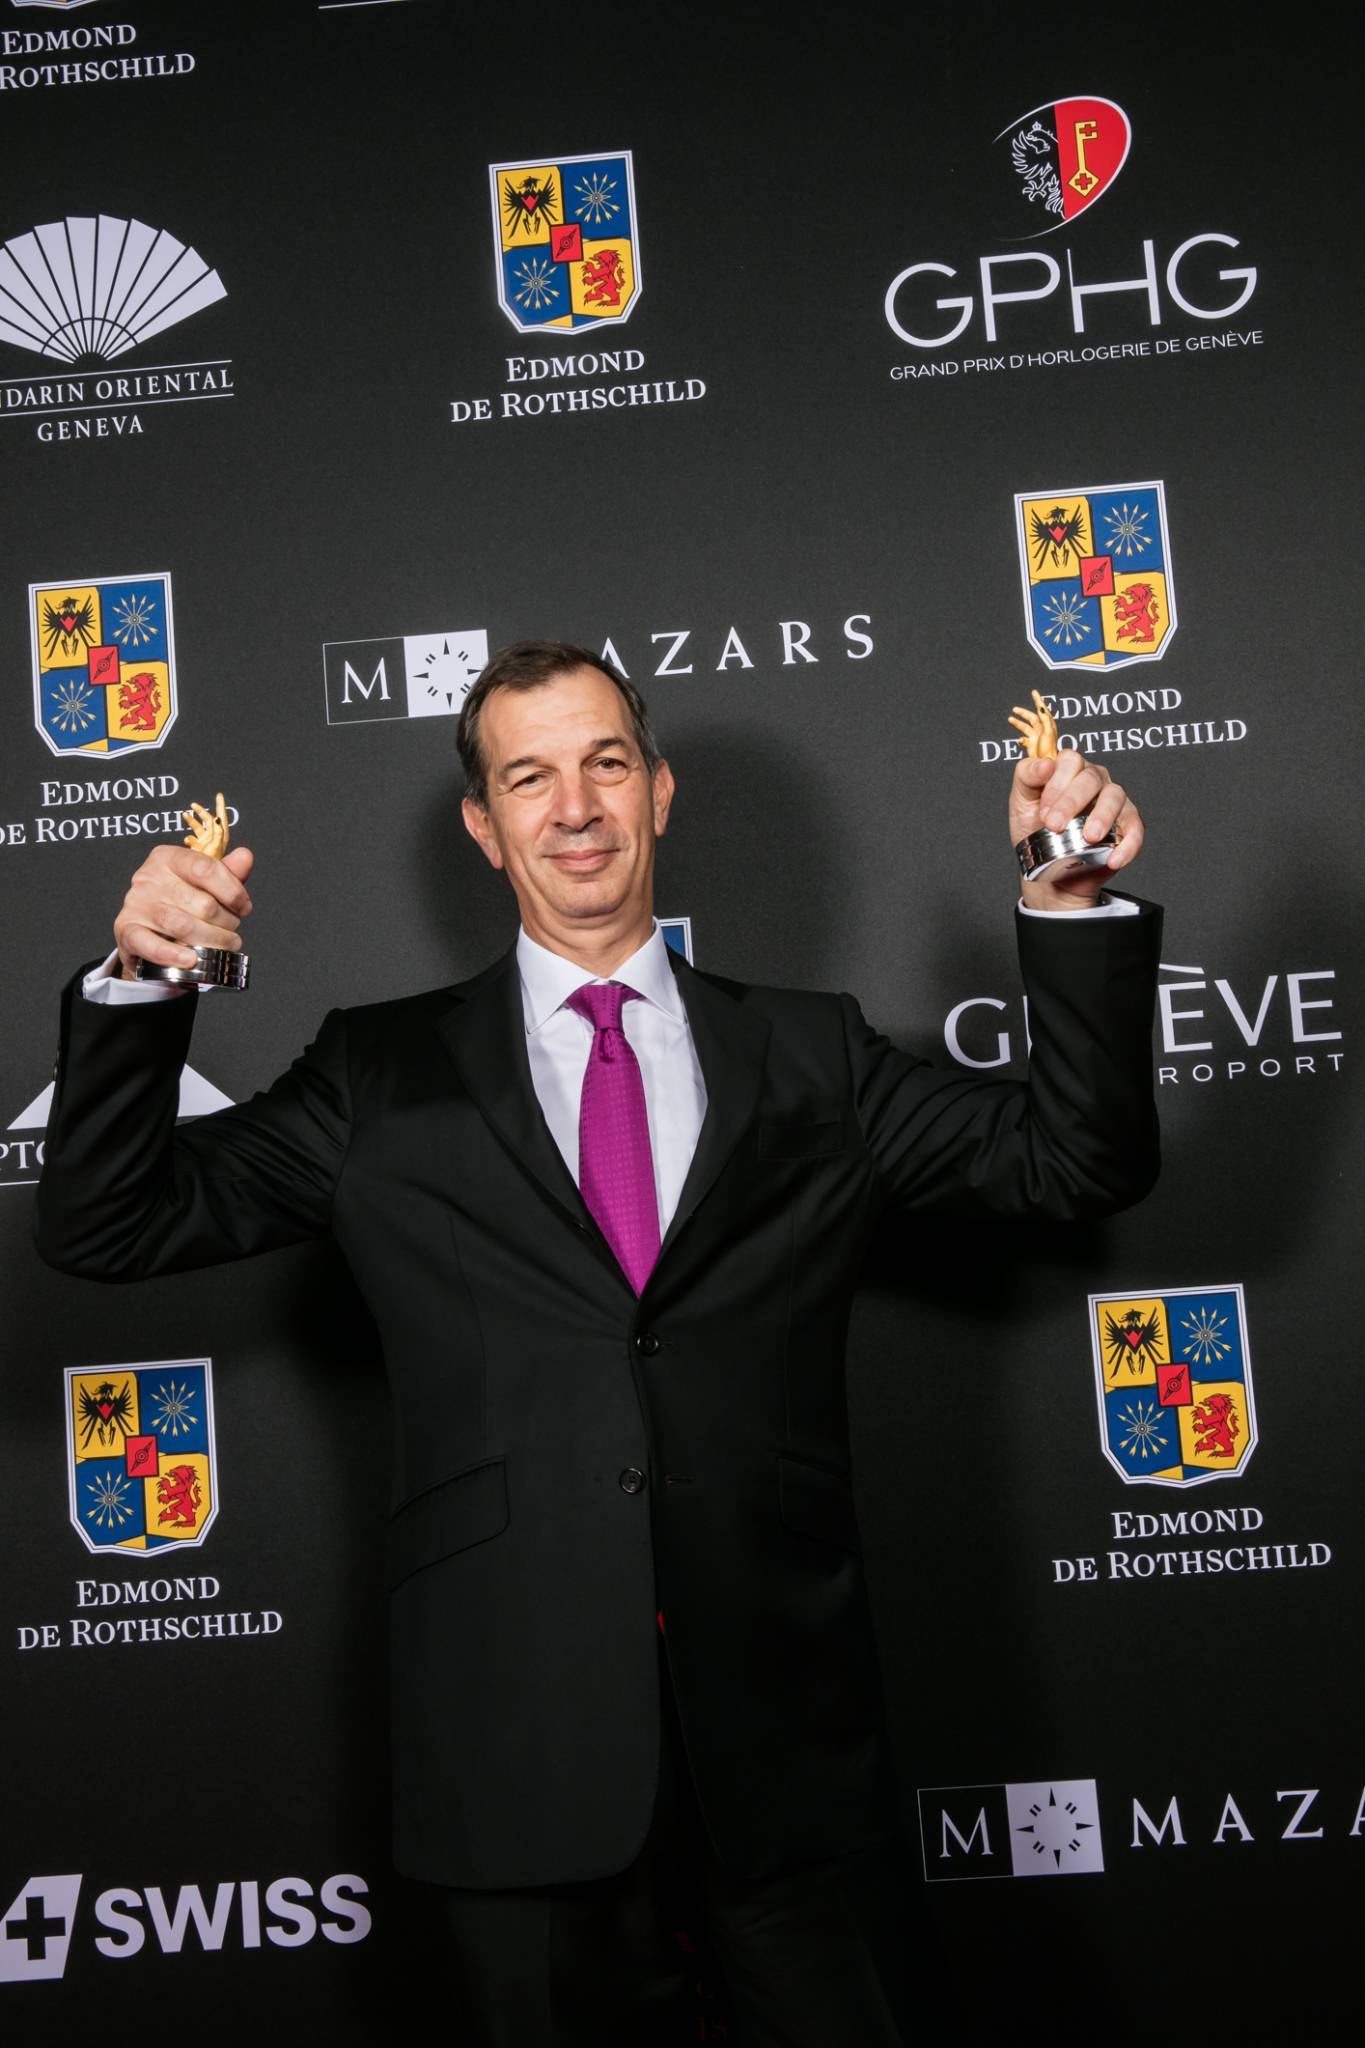 Philippe Léopold-Metzger (CEO of Piaget, winner of the Chronograph Watch Prize 2015 and the Revival Watch Prize 2015)